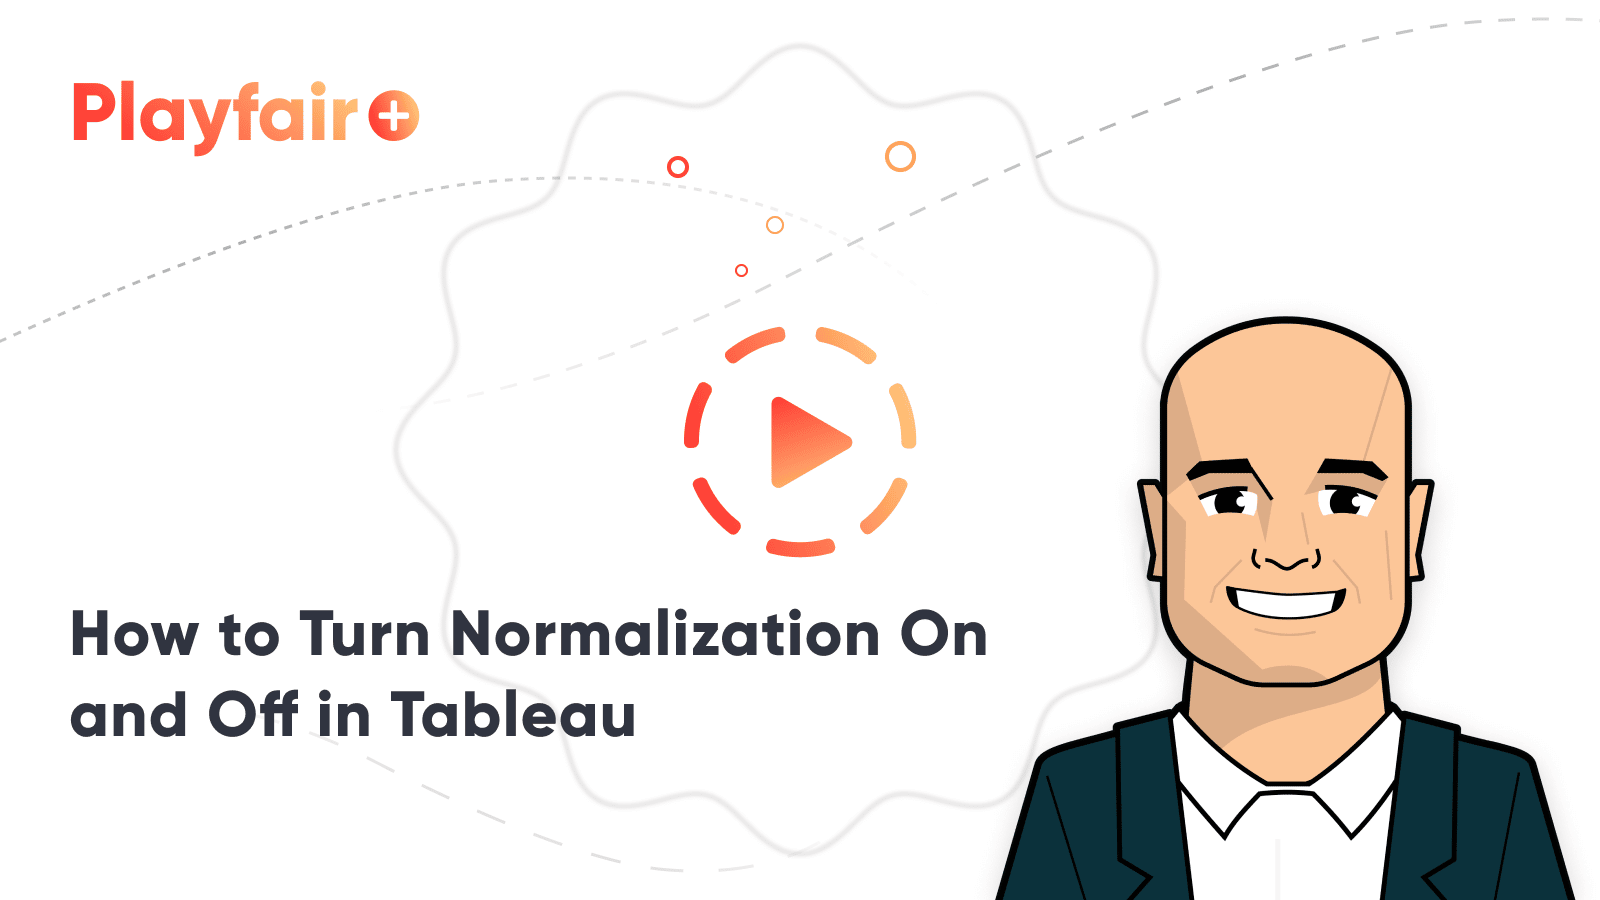 How to Turn Normalization On and Off in Tableau